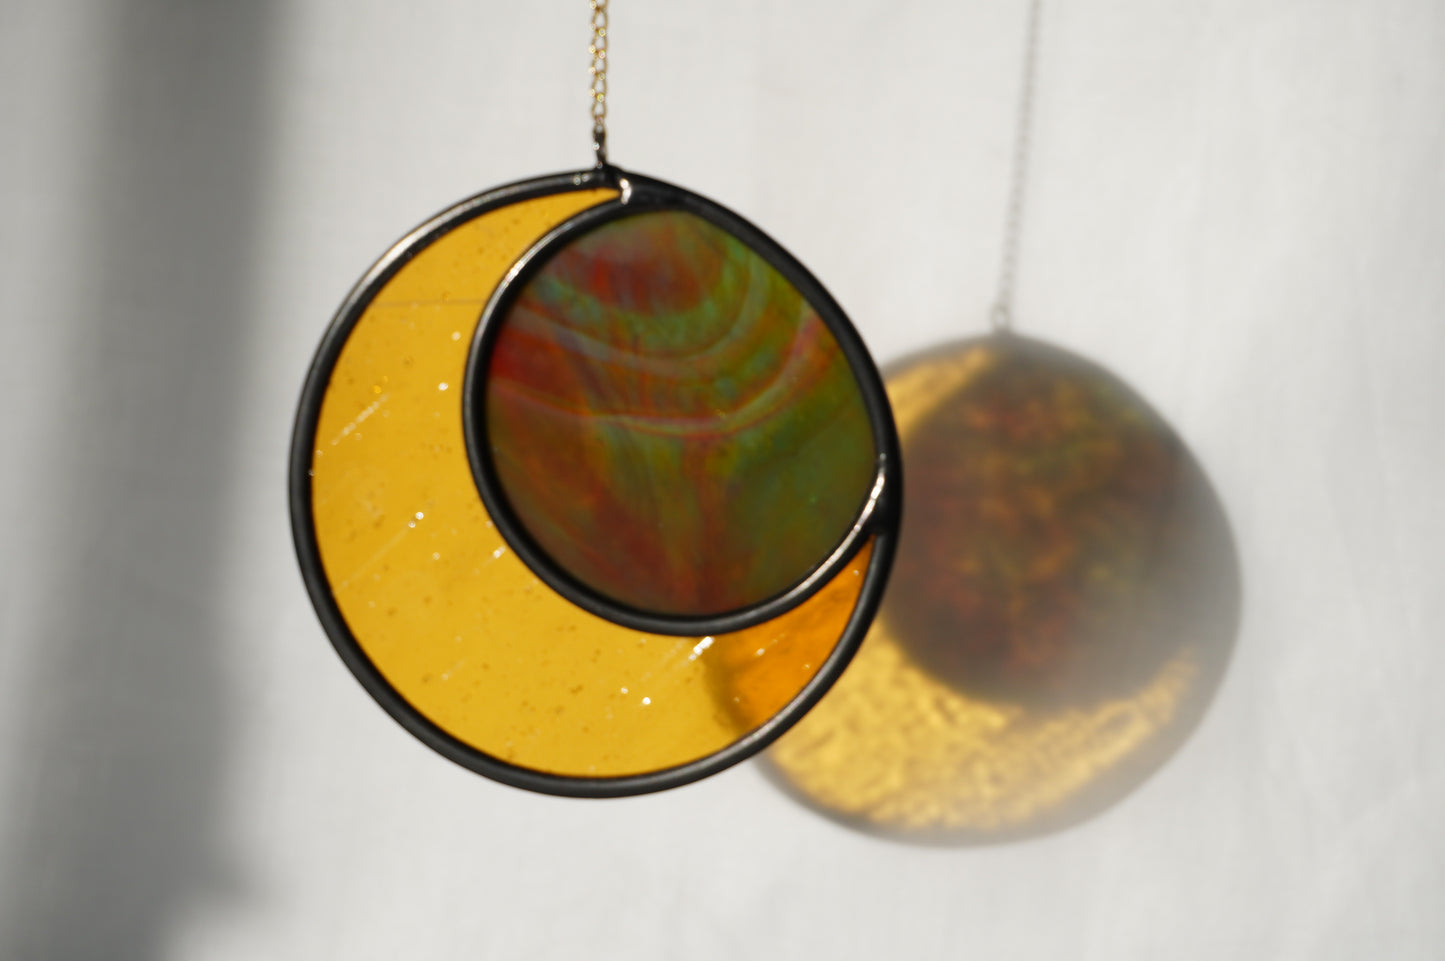 Stained Glass Moon, Made to Order